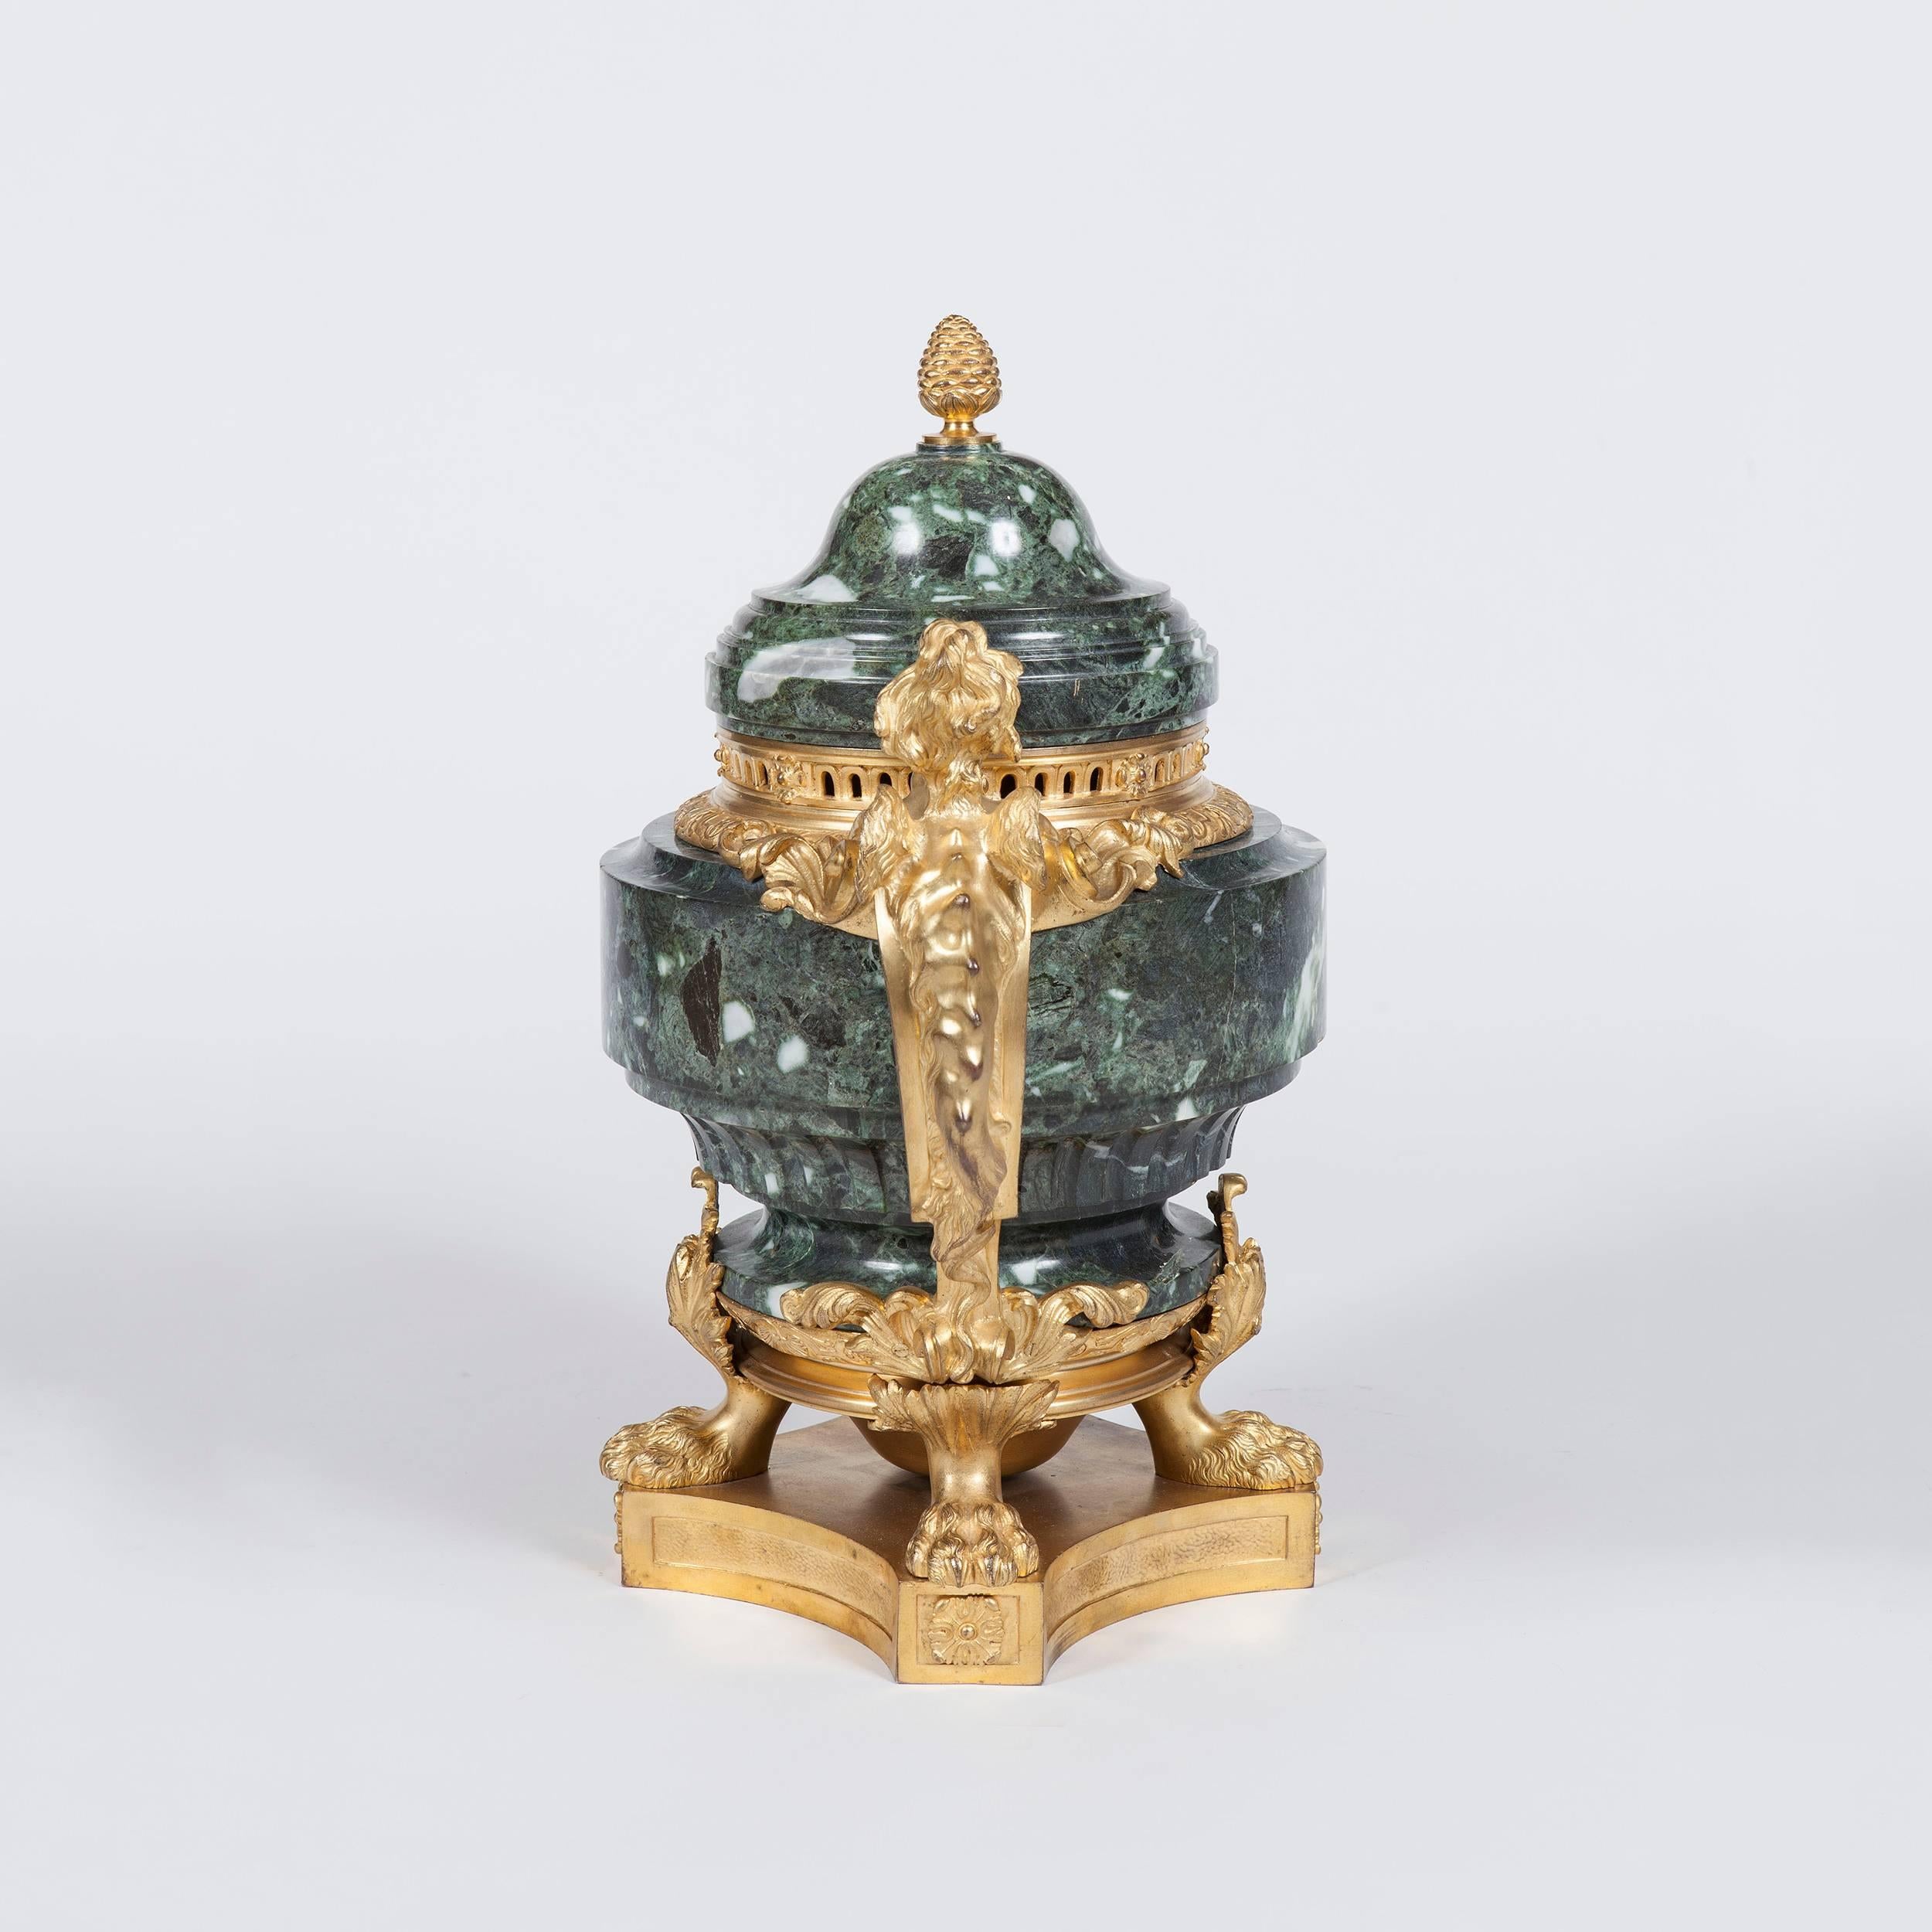 A fine pair of marble vases in the Régence manner

Constructed utilizing a strikingly marked Grecian green marble, dressed with ormolu mounts; the bases of incurved square form, with flower heads at the angles, and rectangular panels with piqure